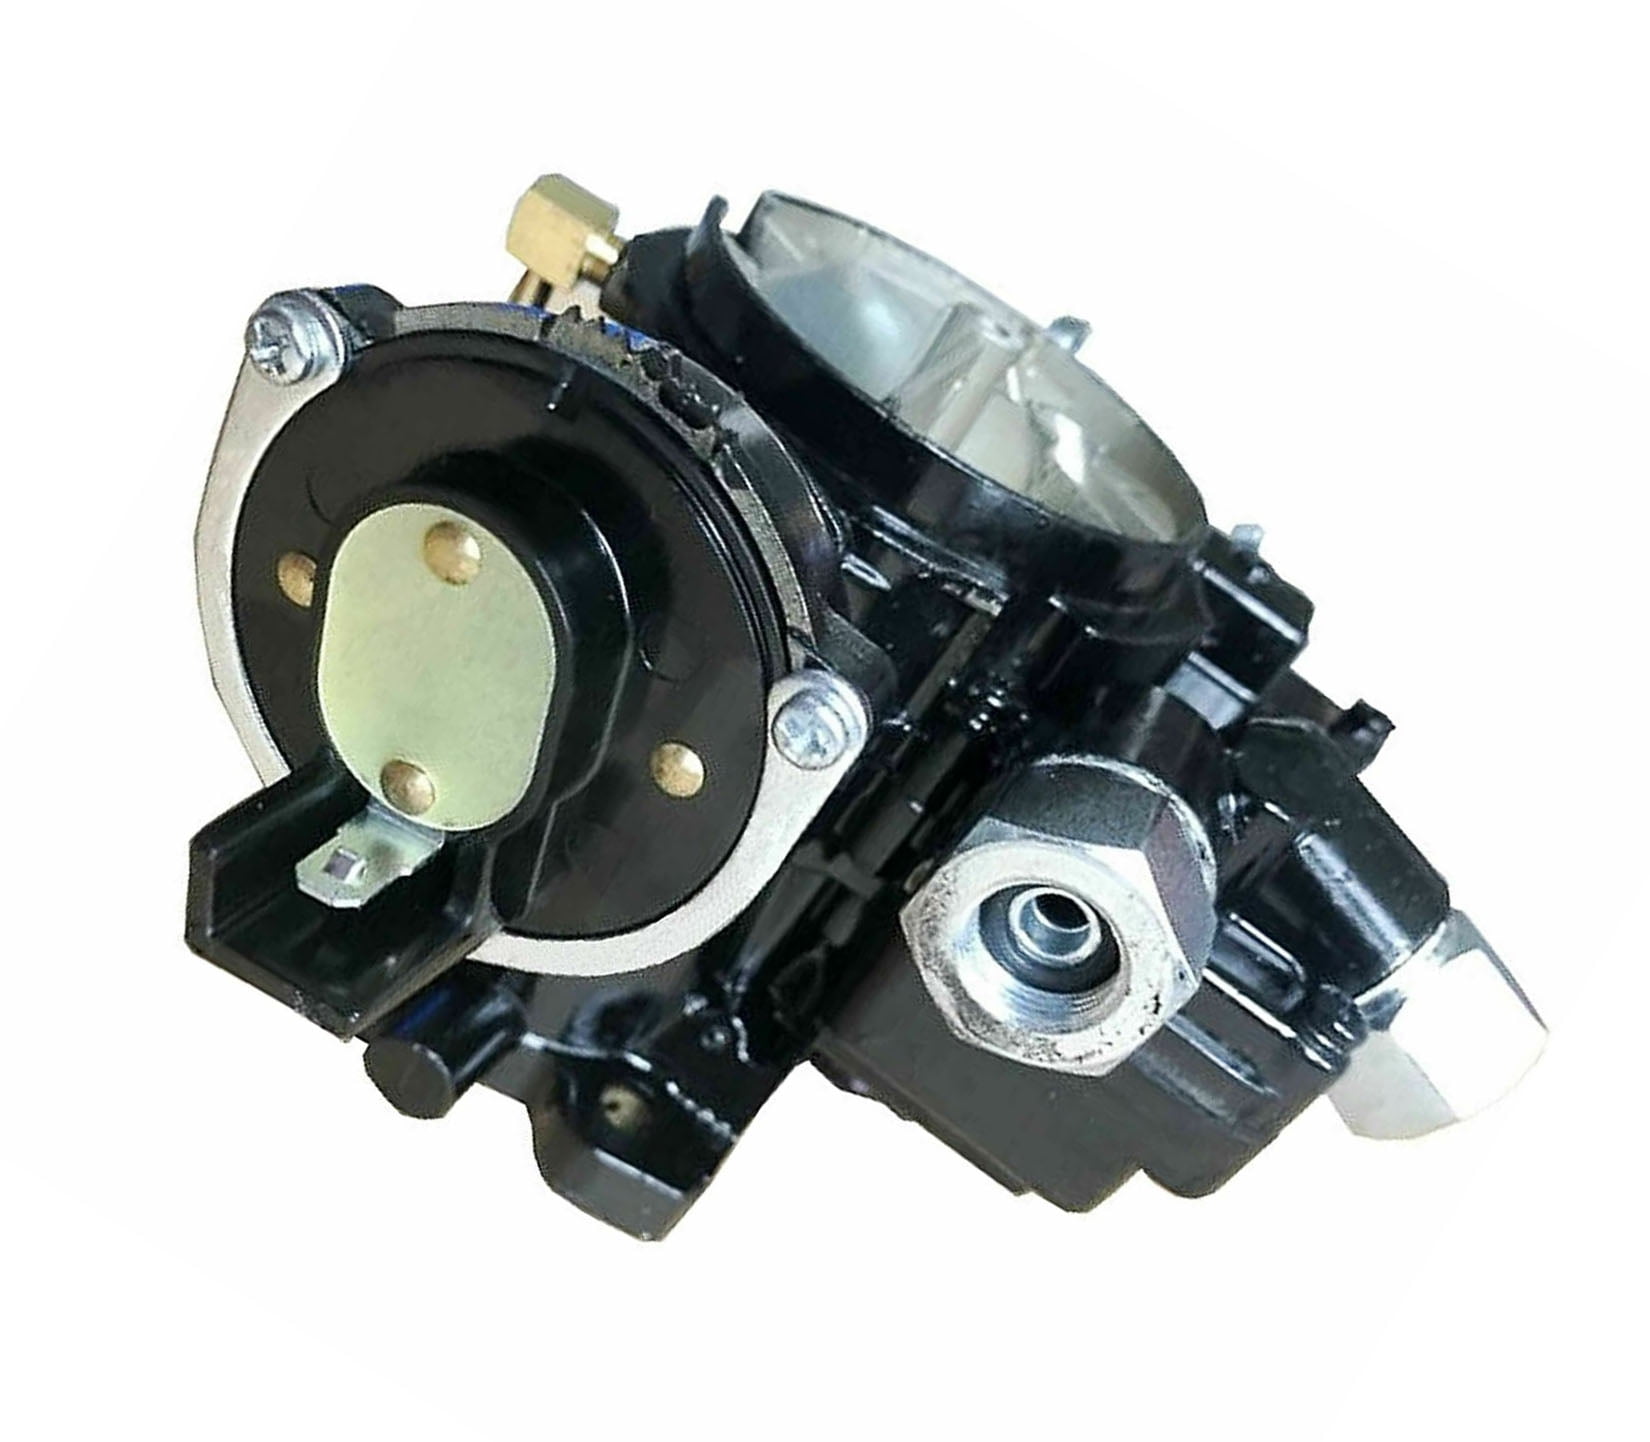 imUfer Marine Carburetor Replacement for Mercruiser 2 Barrel 3.0L 4 CYL with A Long Linkage Black 